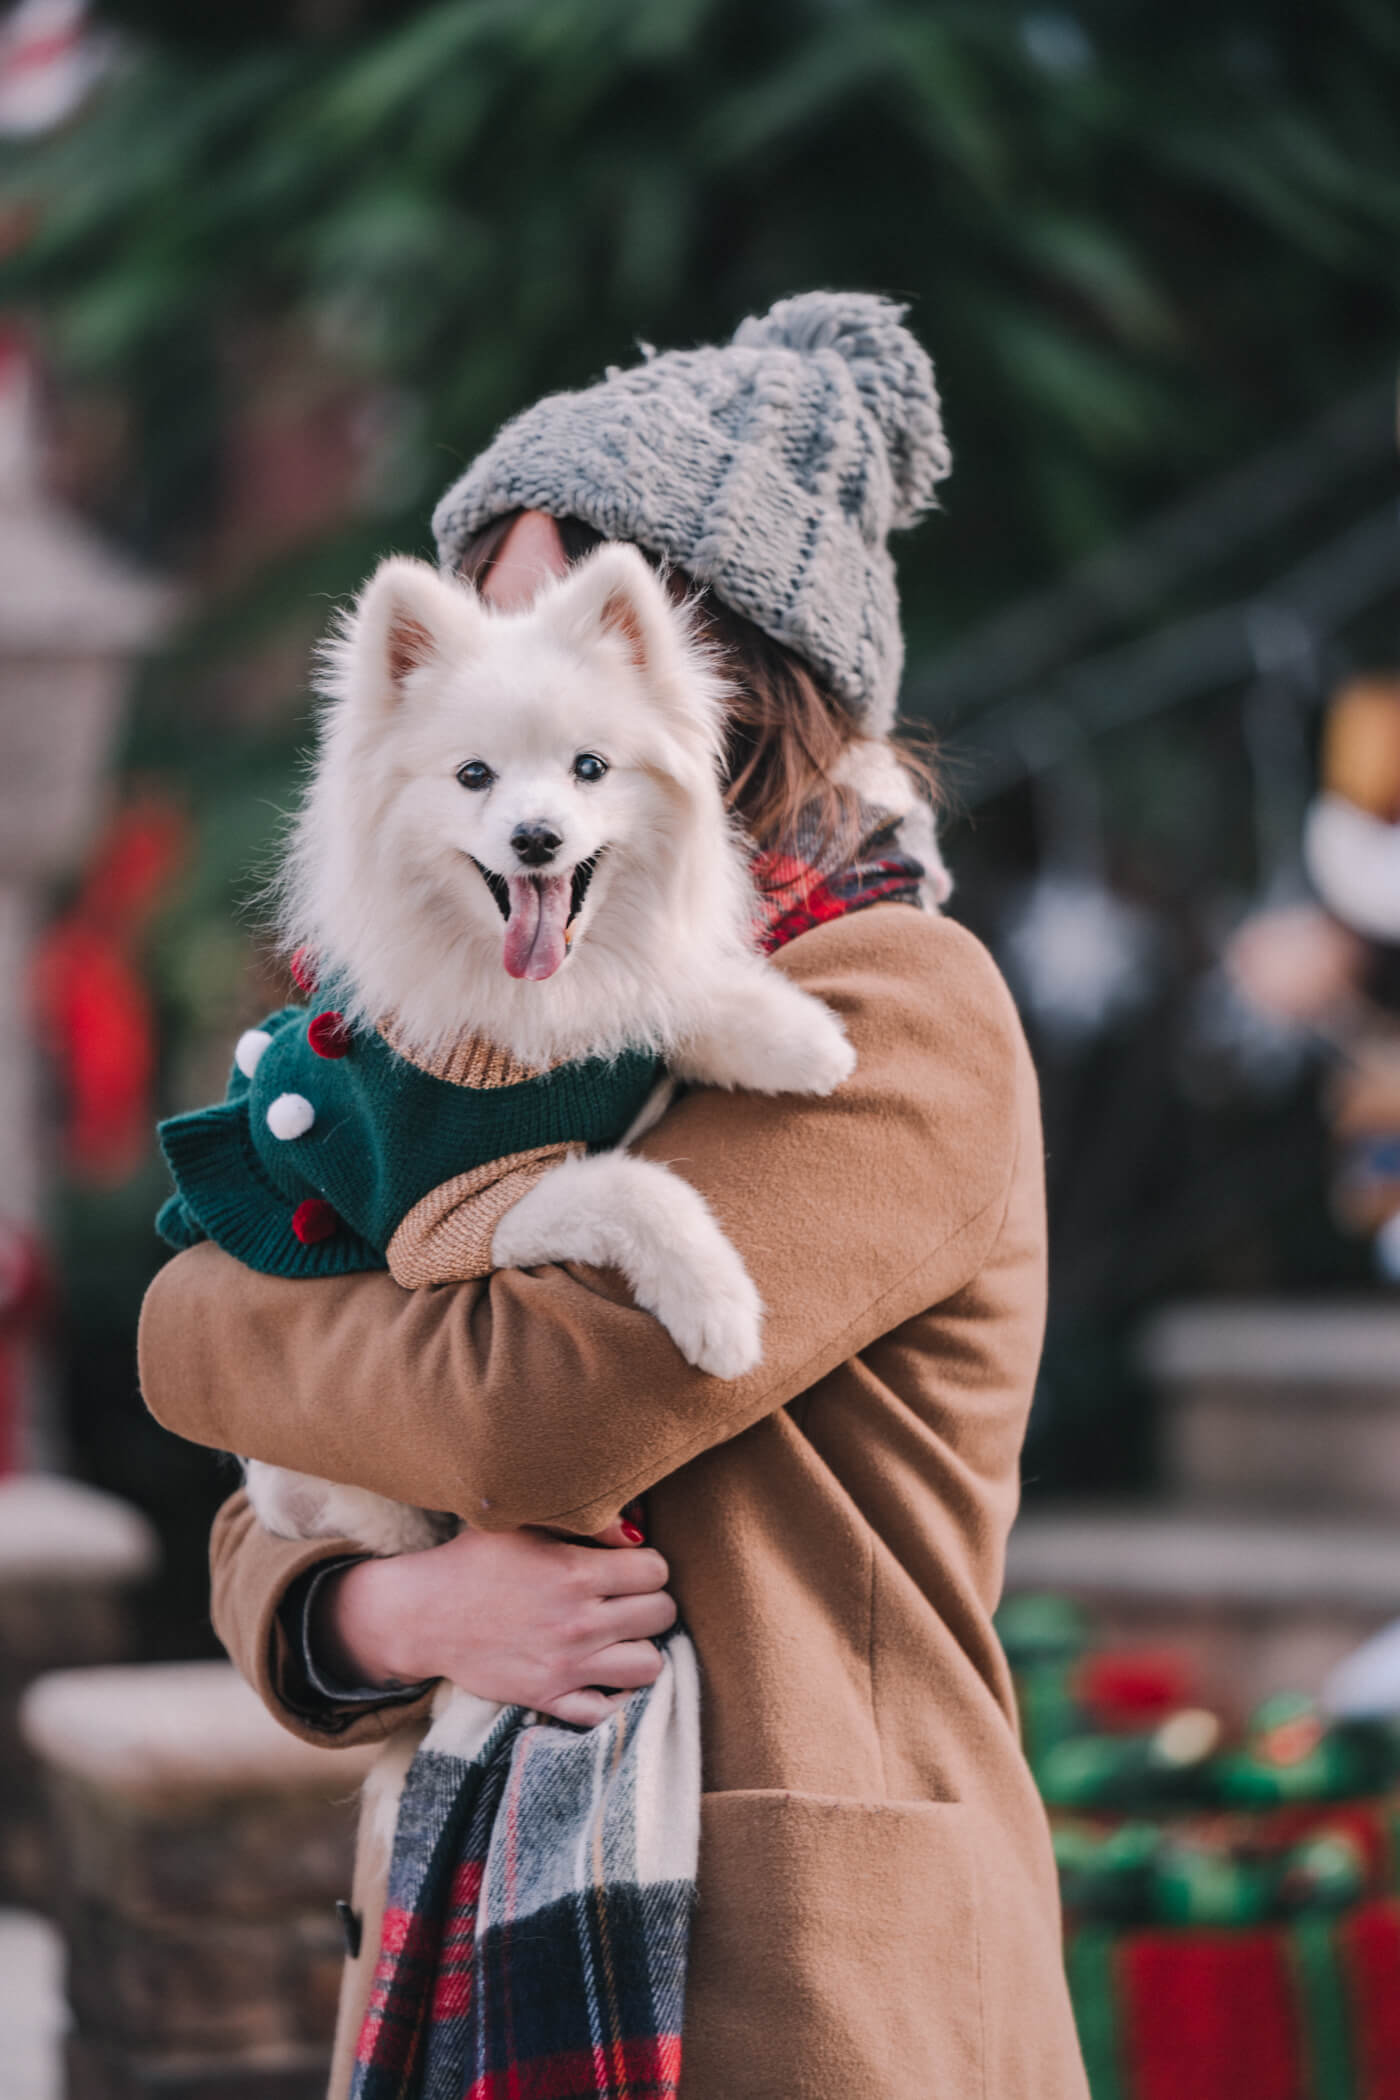 woman carrying her dog to see the Dyker Heights decorations